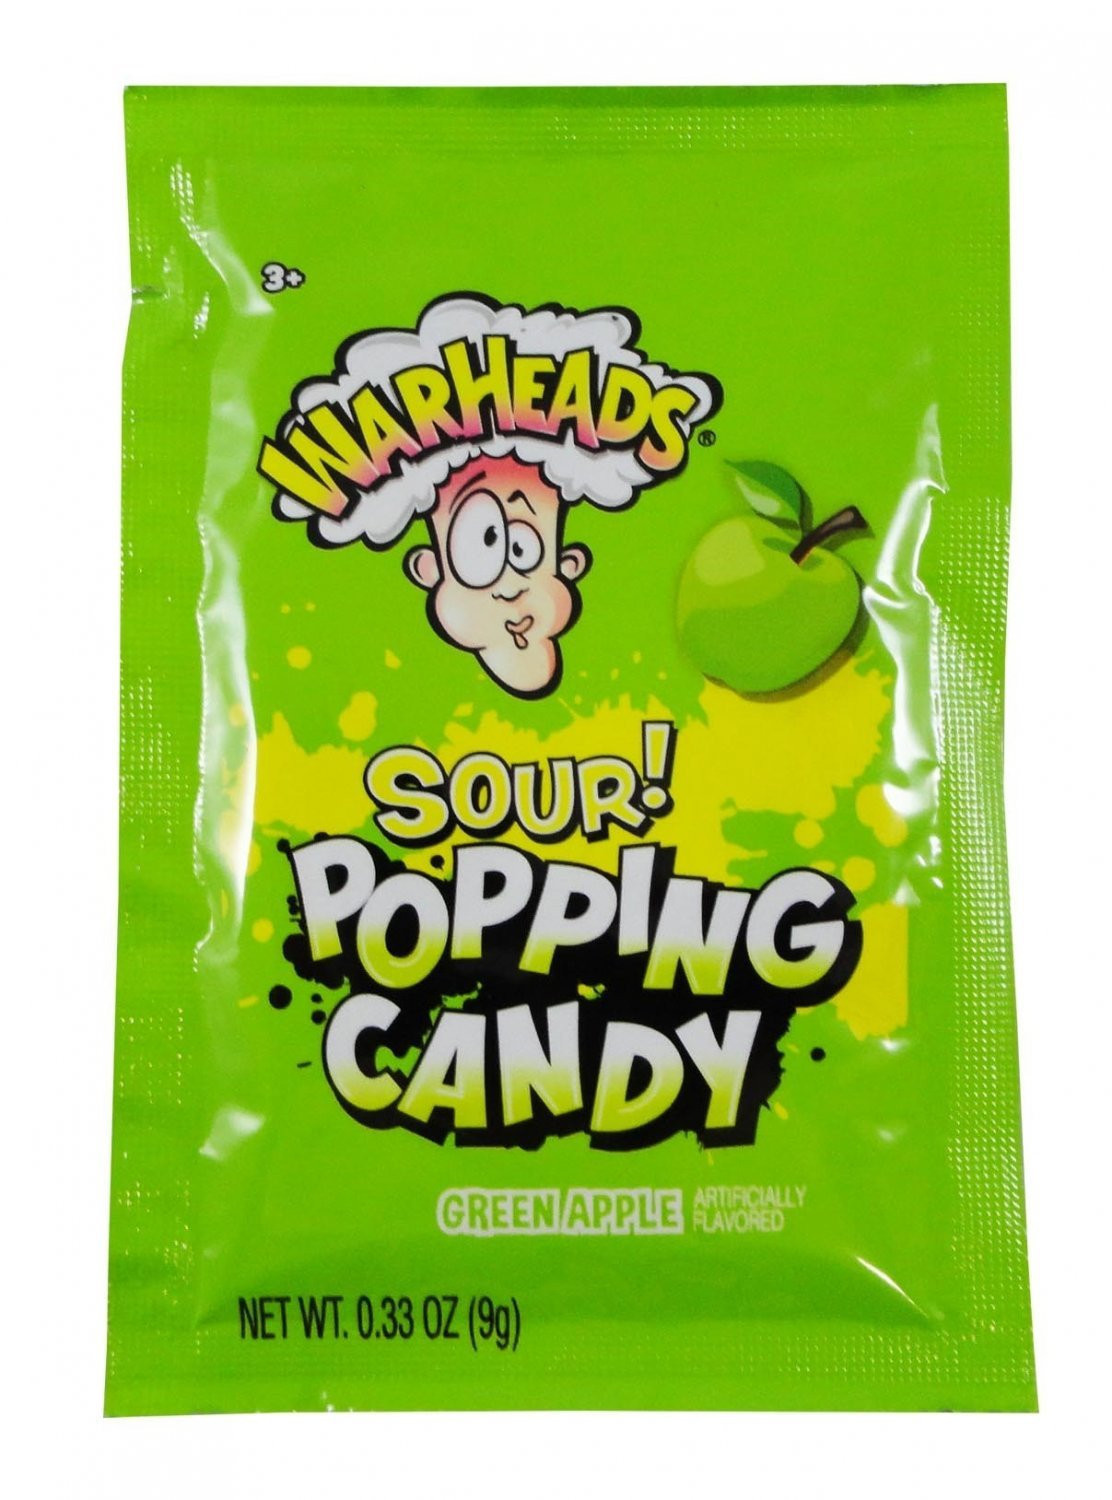 Waheads Warheads SOUR Green Apple Popping Candy Single Pouch .33oz. 